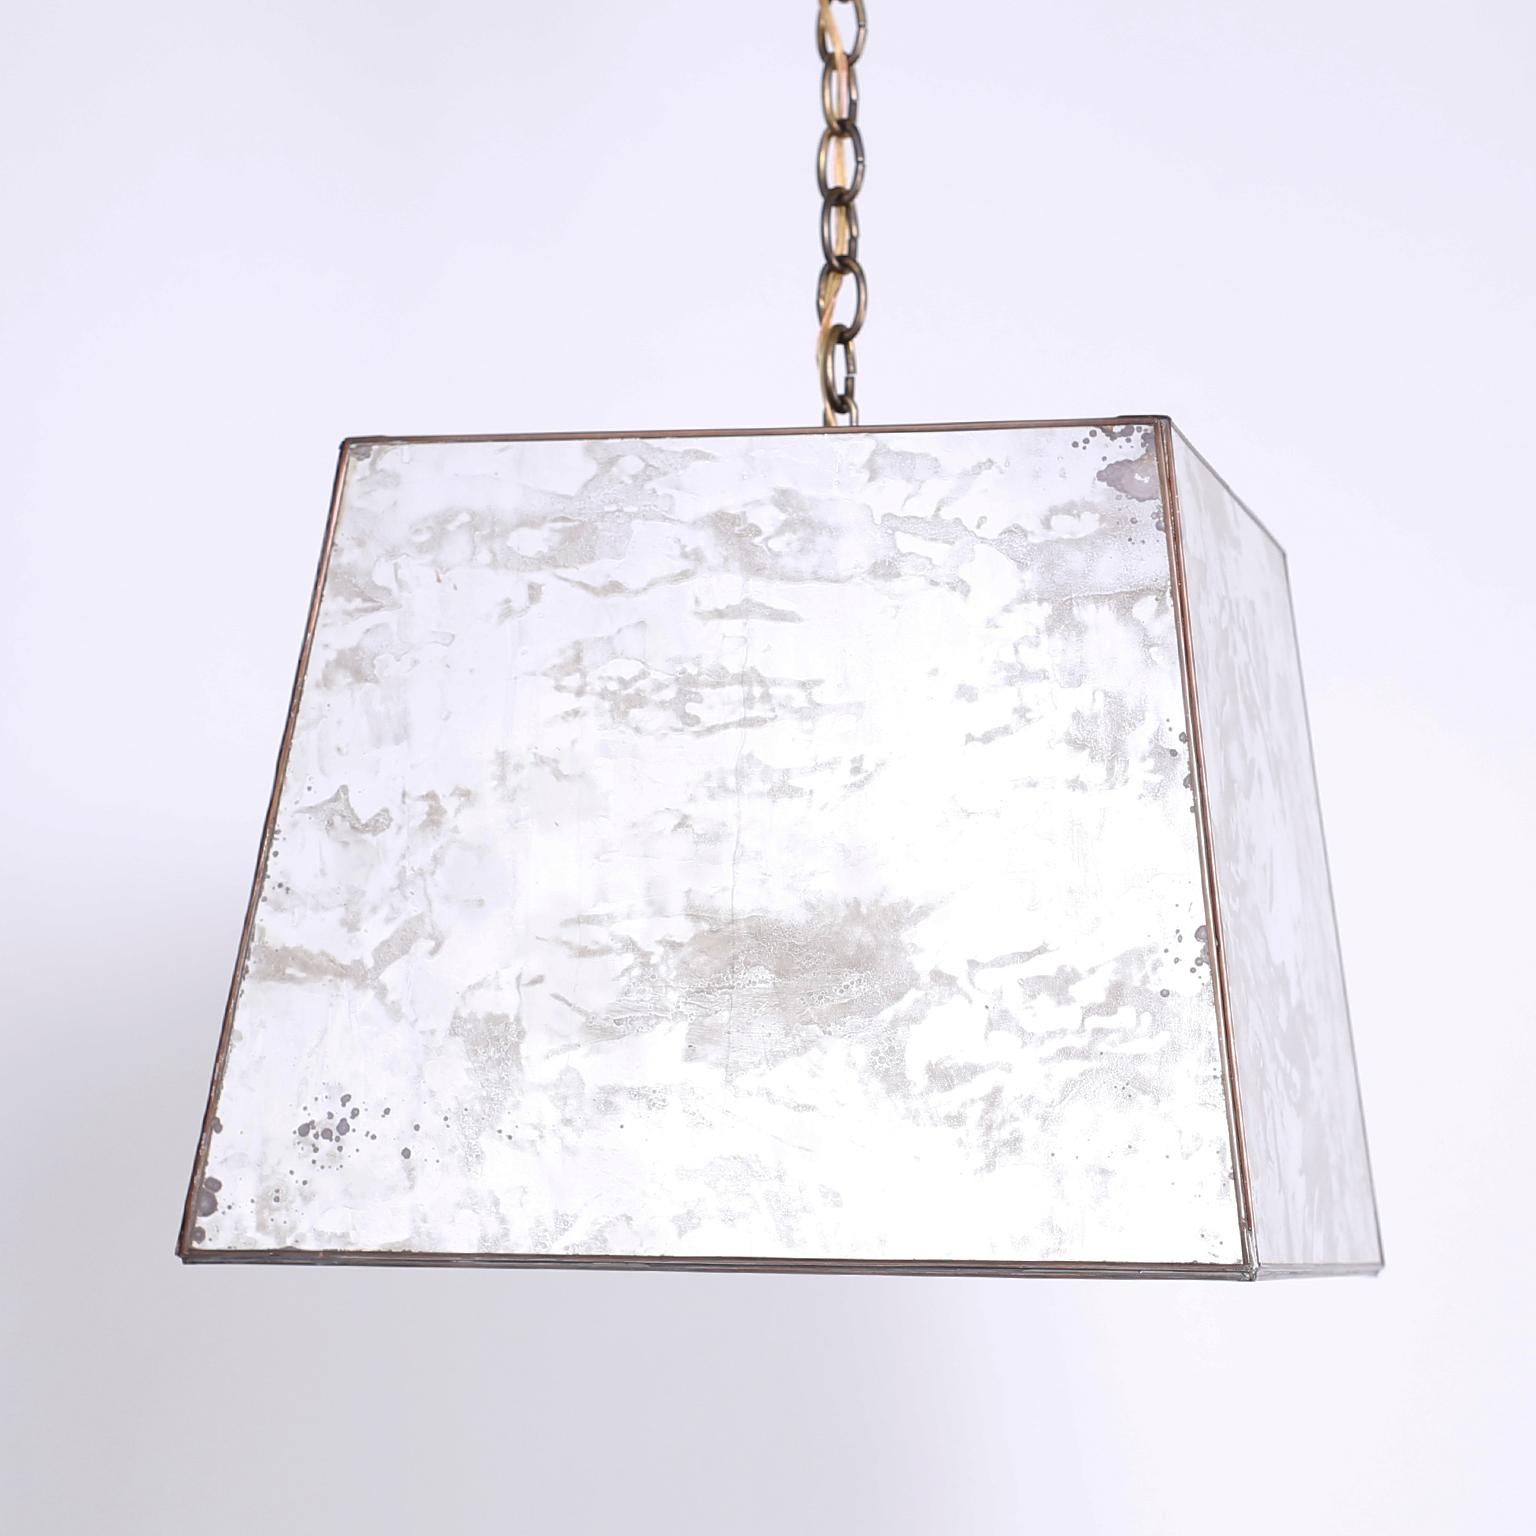 Unique midcentury pendant with marbleized and oxidized mirrored panels in a trapezoid form. The bottom has an open square that casts light down.